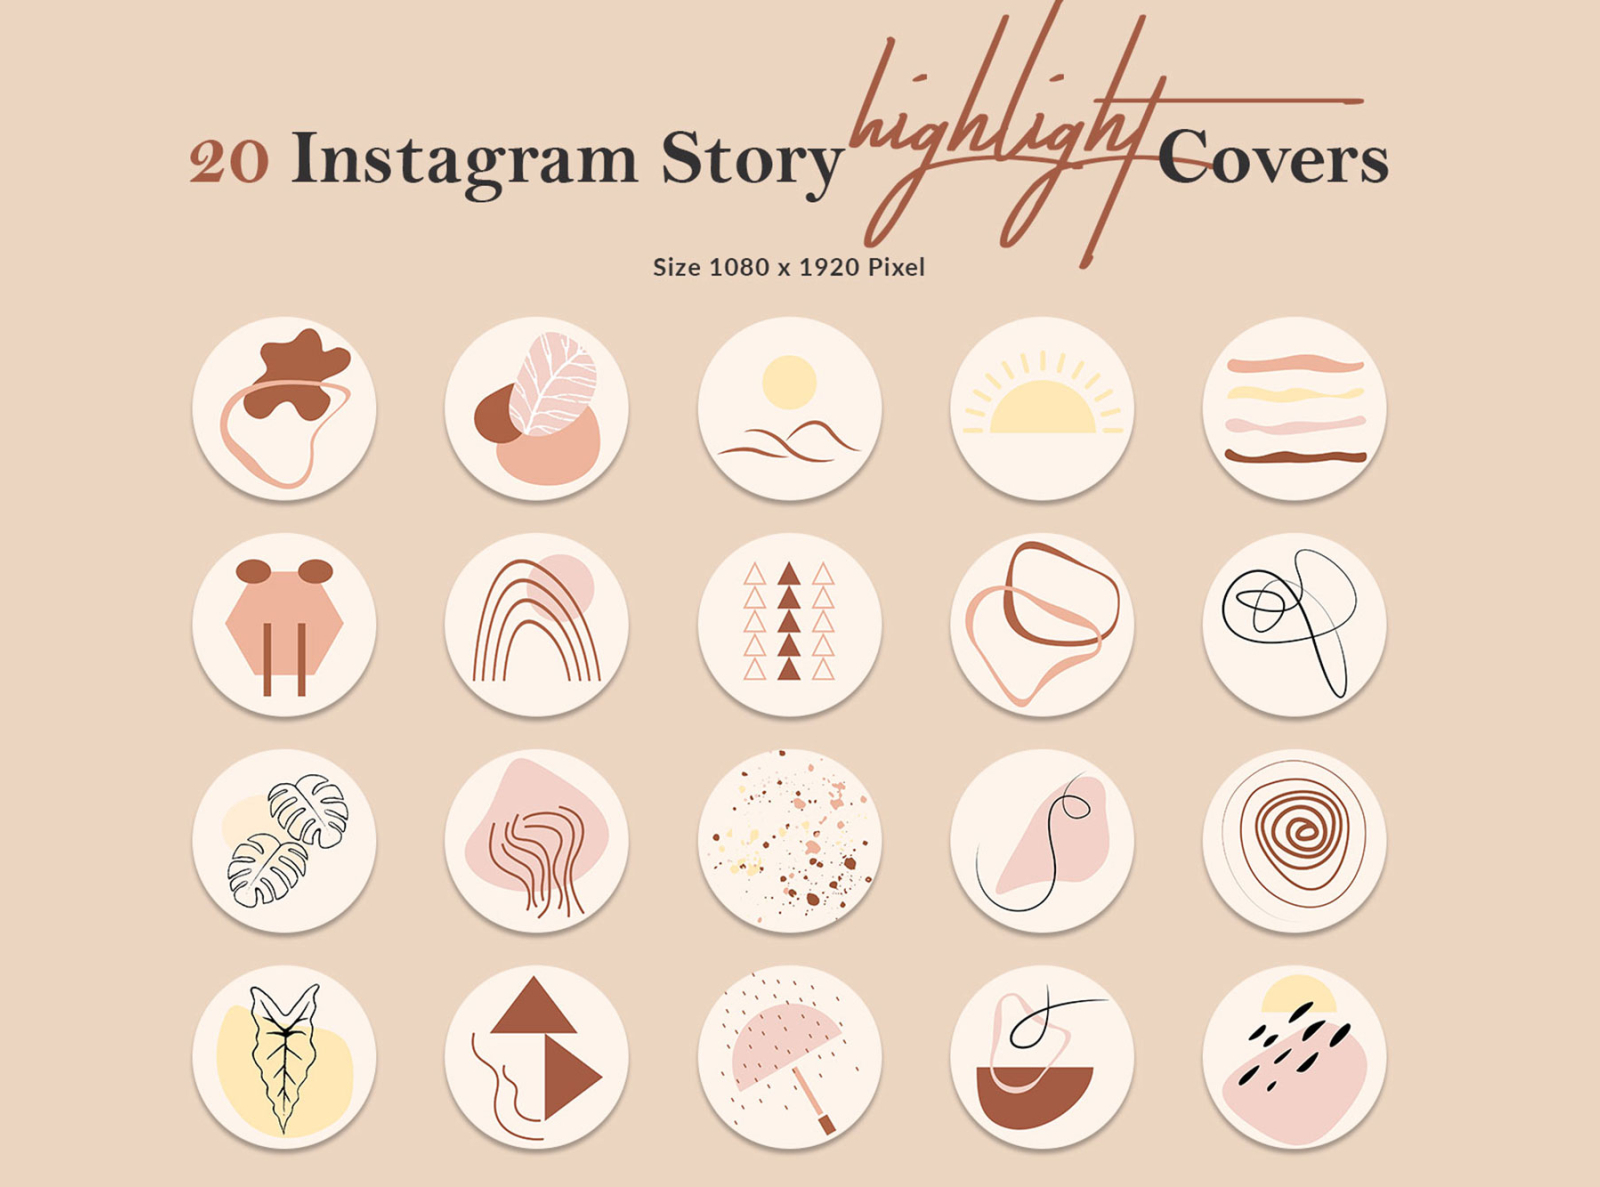 Instagram Story Highlight Covers Template by Amit Debnath on Dribbble